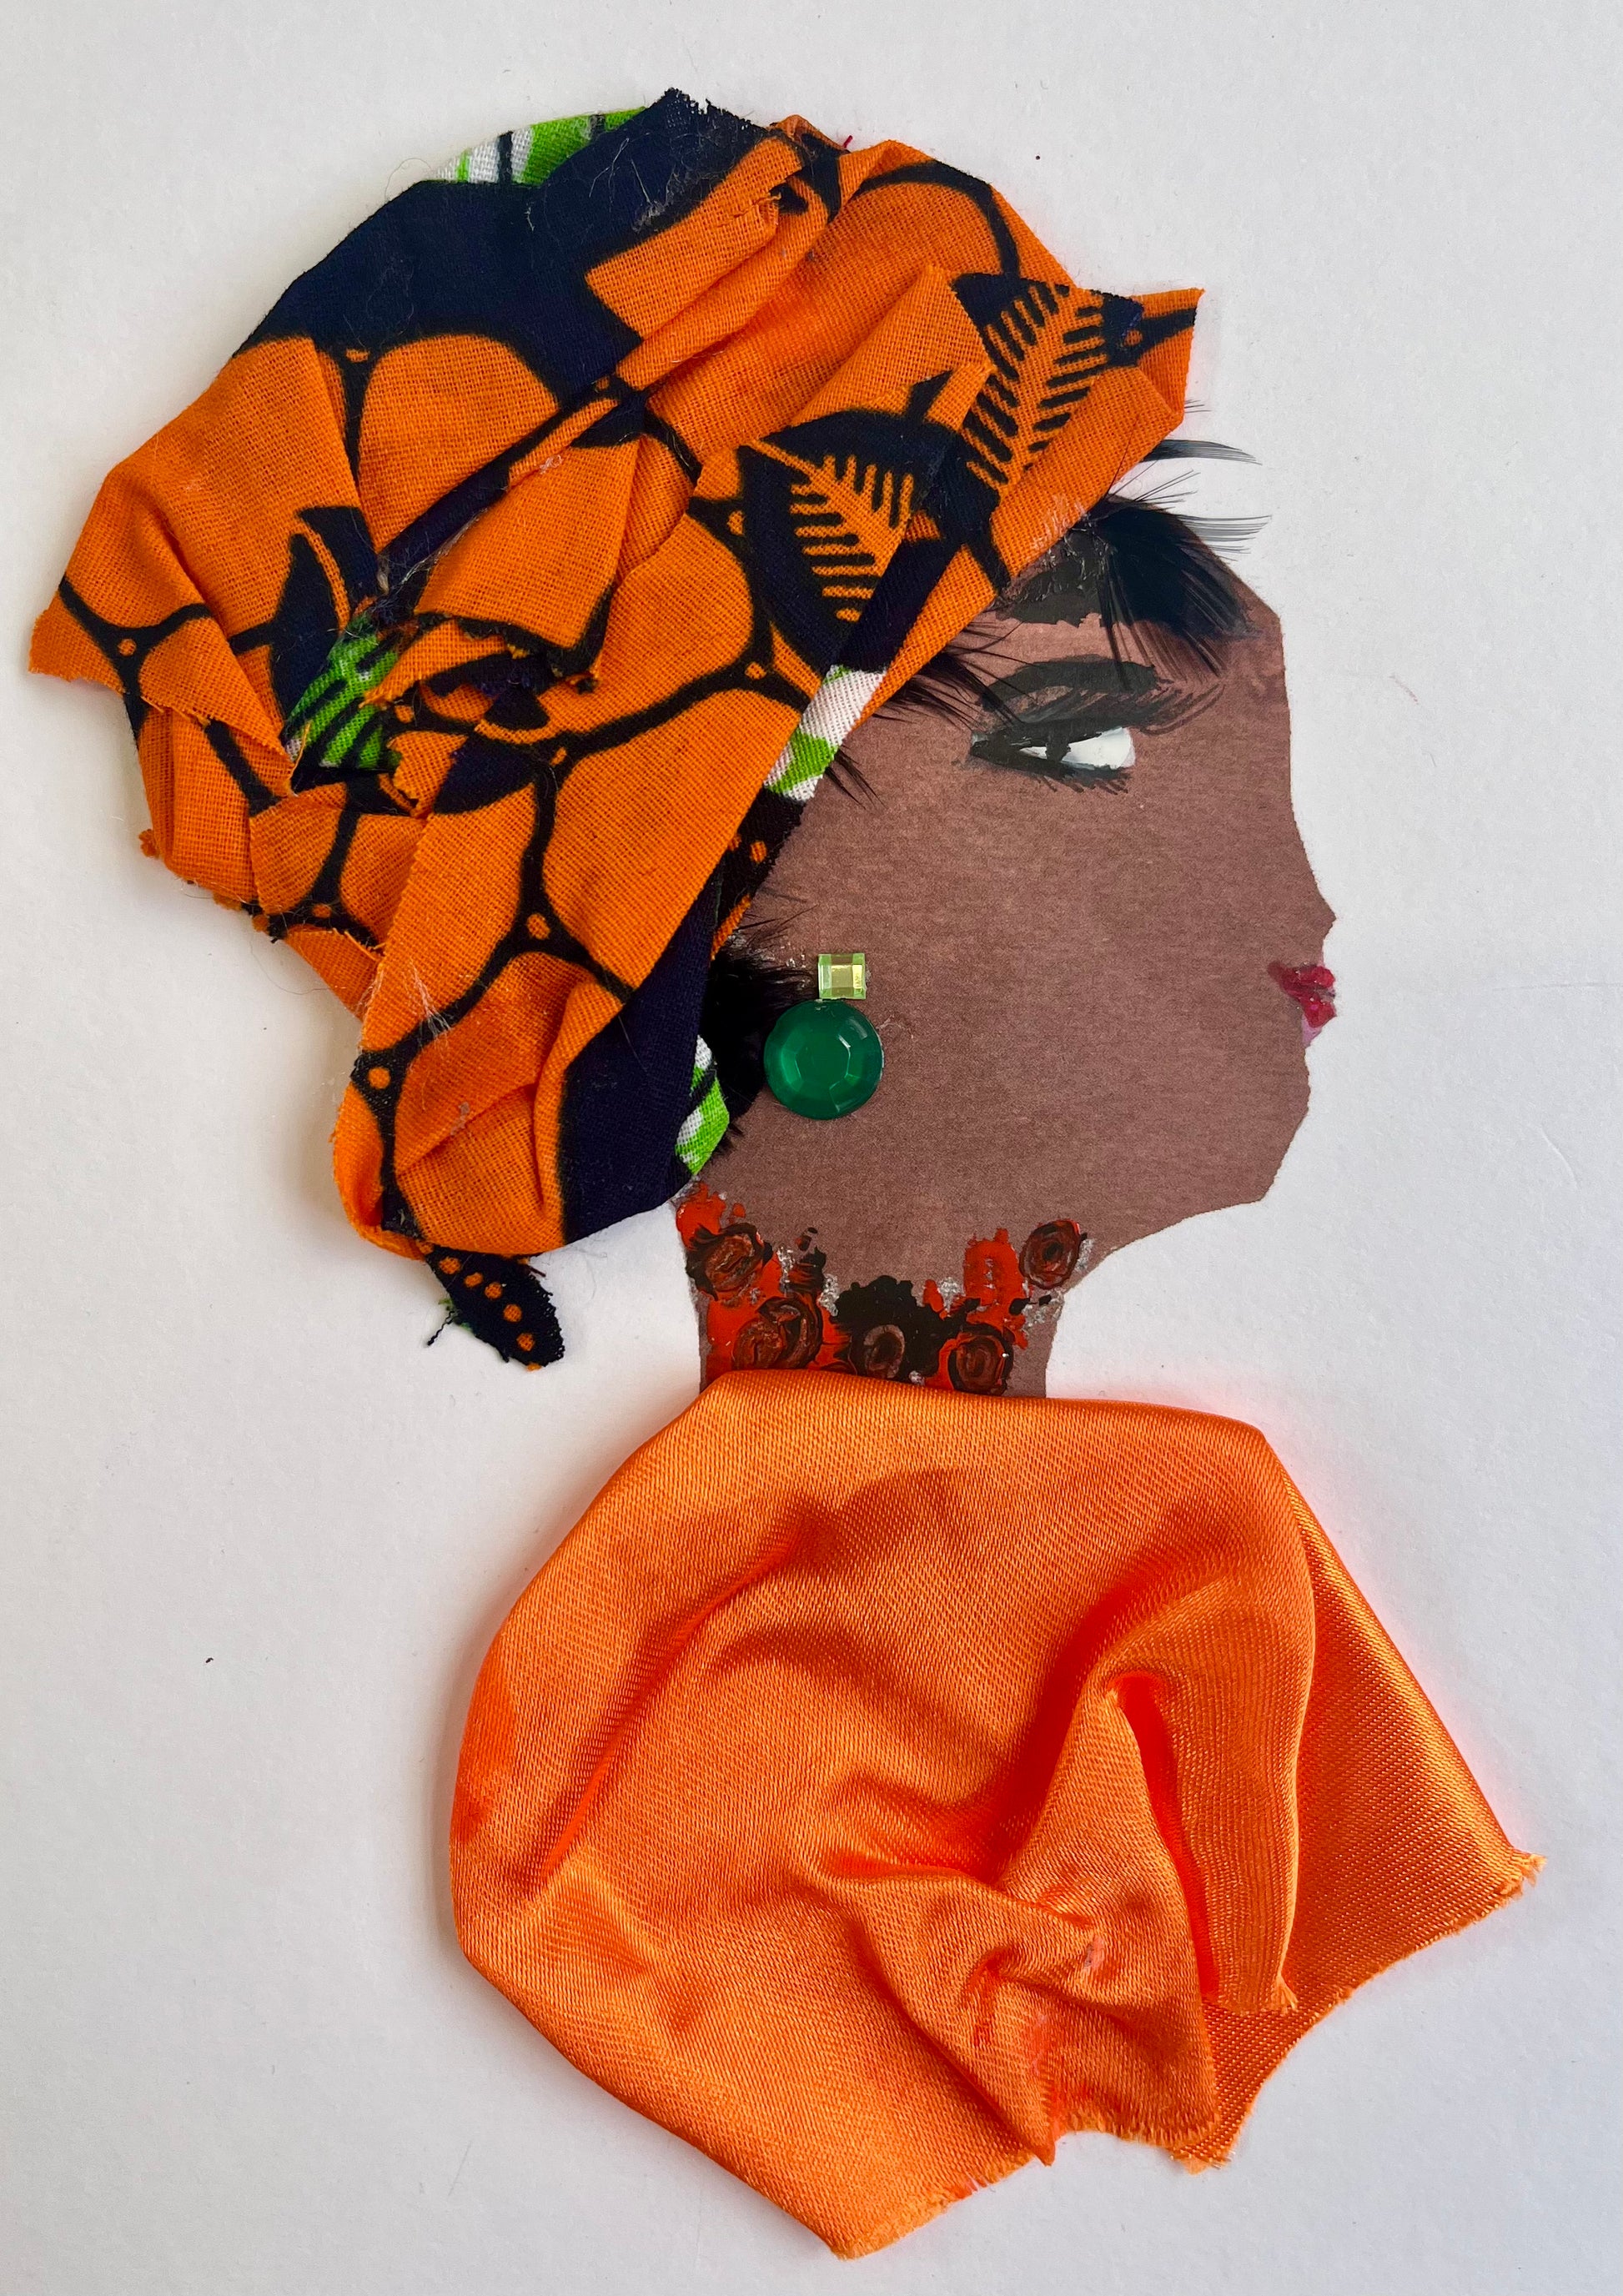 This card is called Kehlani. She wears a bright orange blouse and a headscarf which has orange and black in it. Her earring is a green gemstone. 